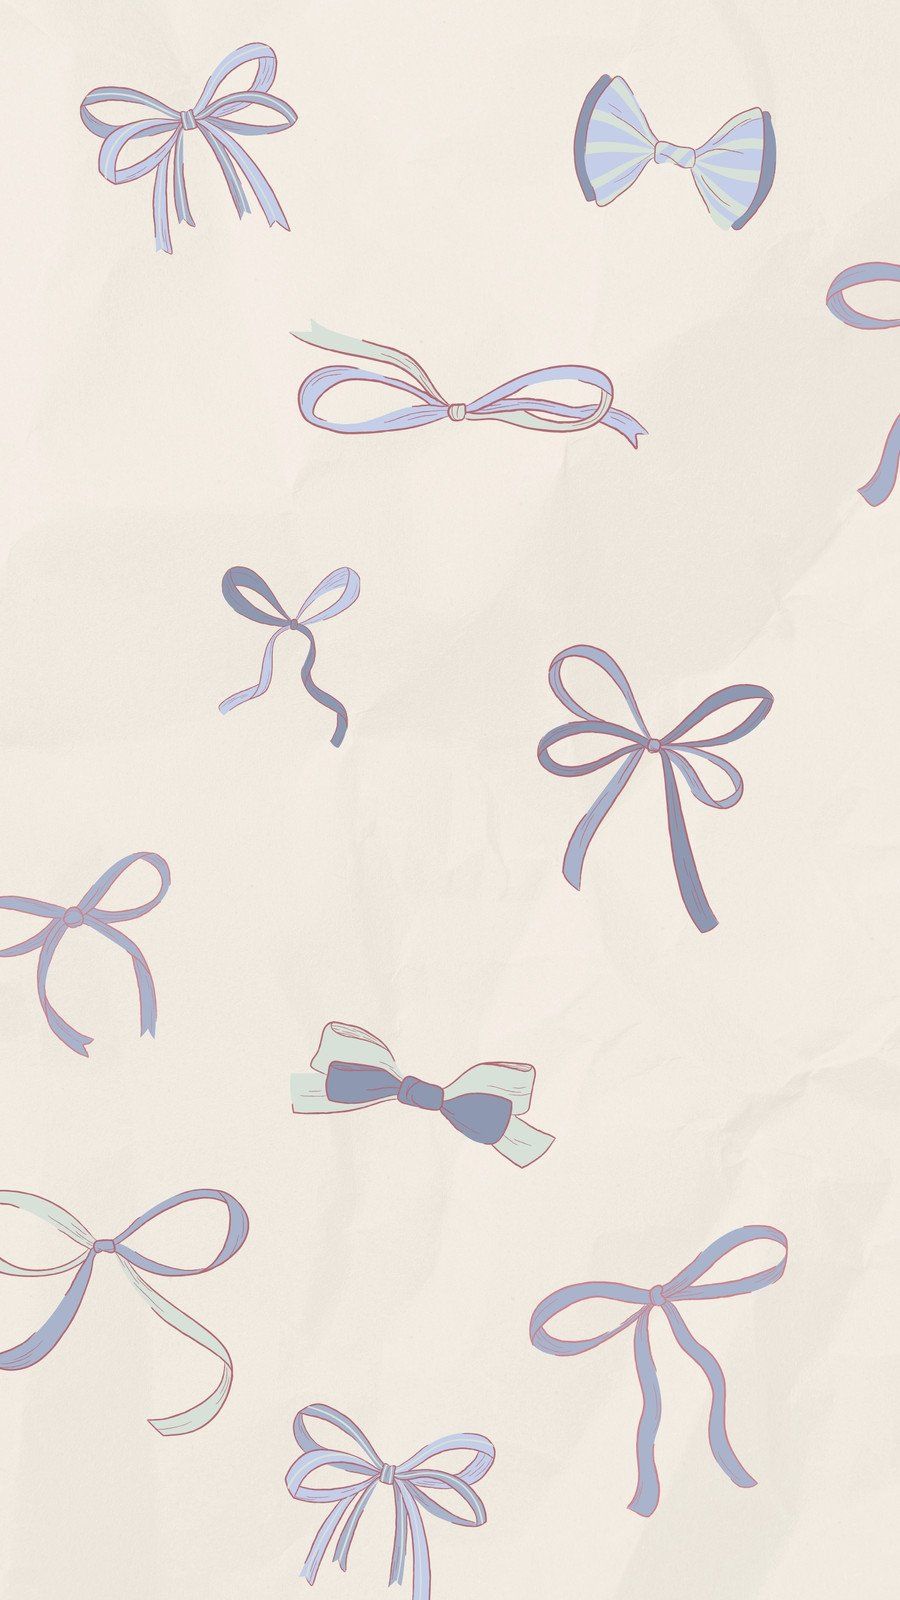 A phone wallpaper with blue and purple bow ribbons on a cream background - Coquette, design